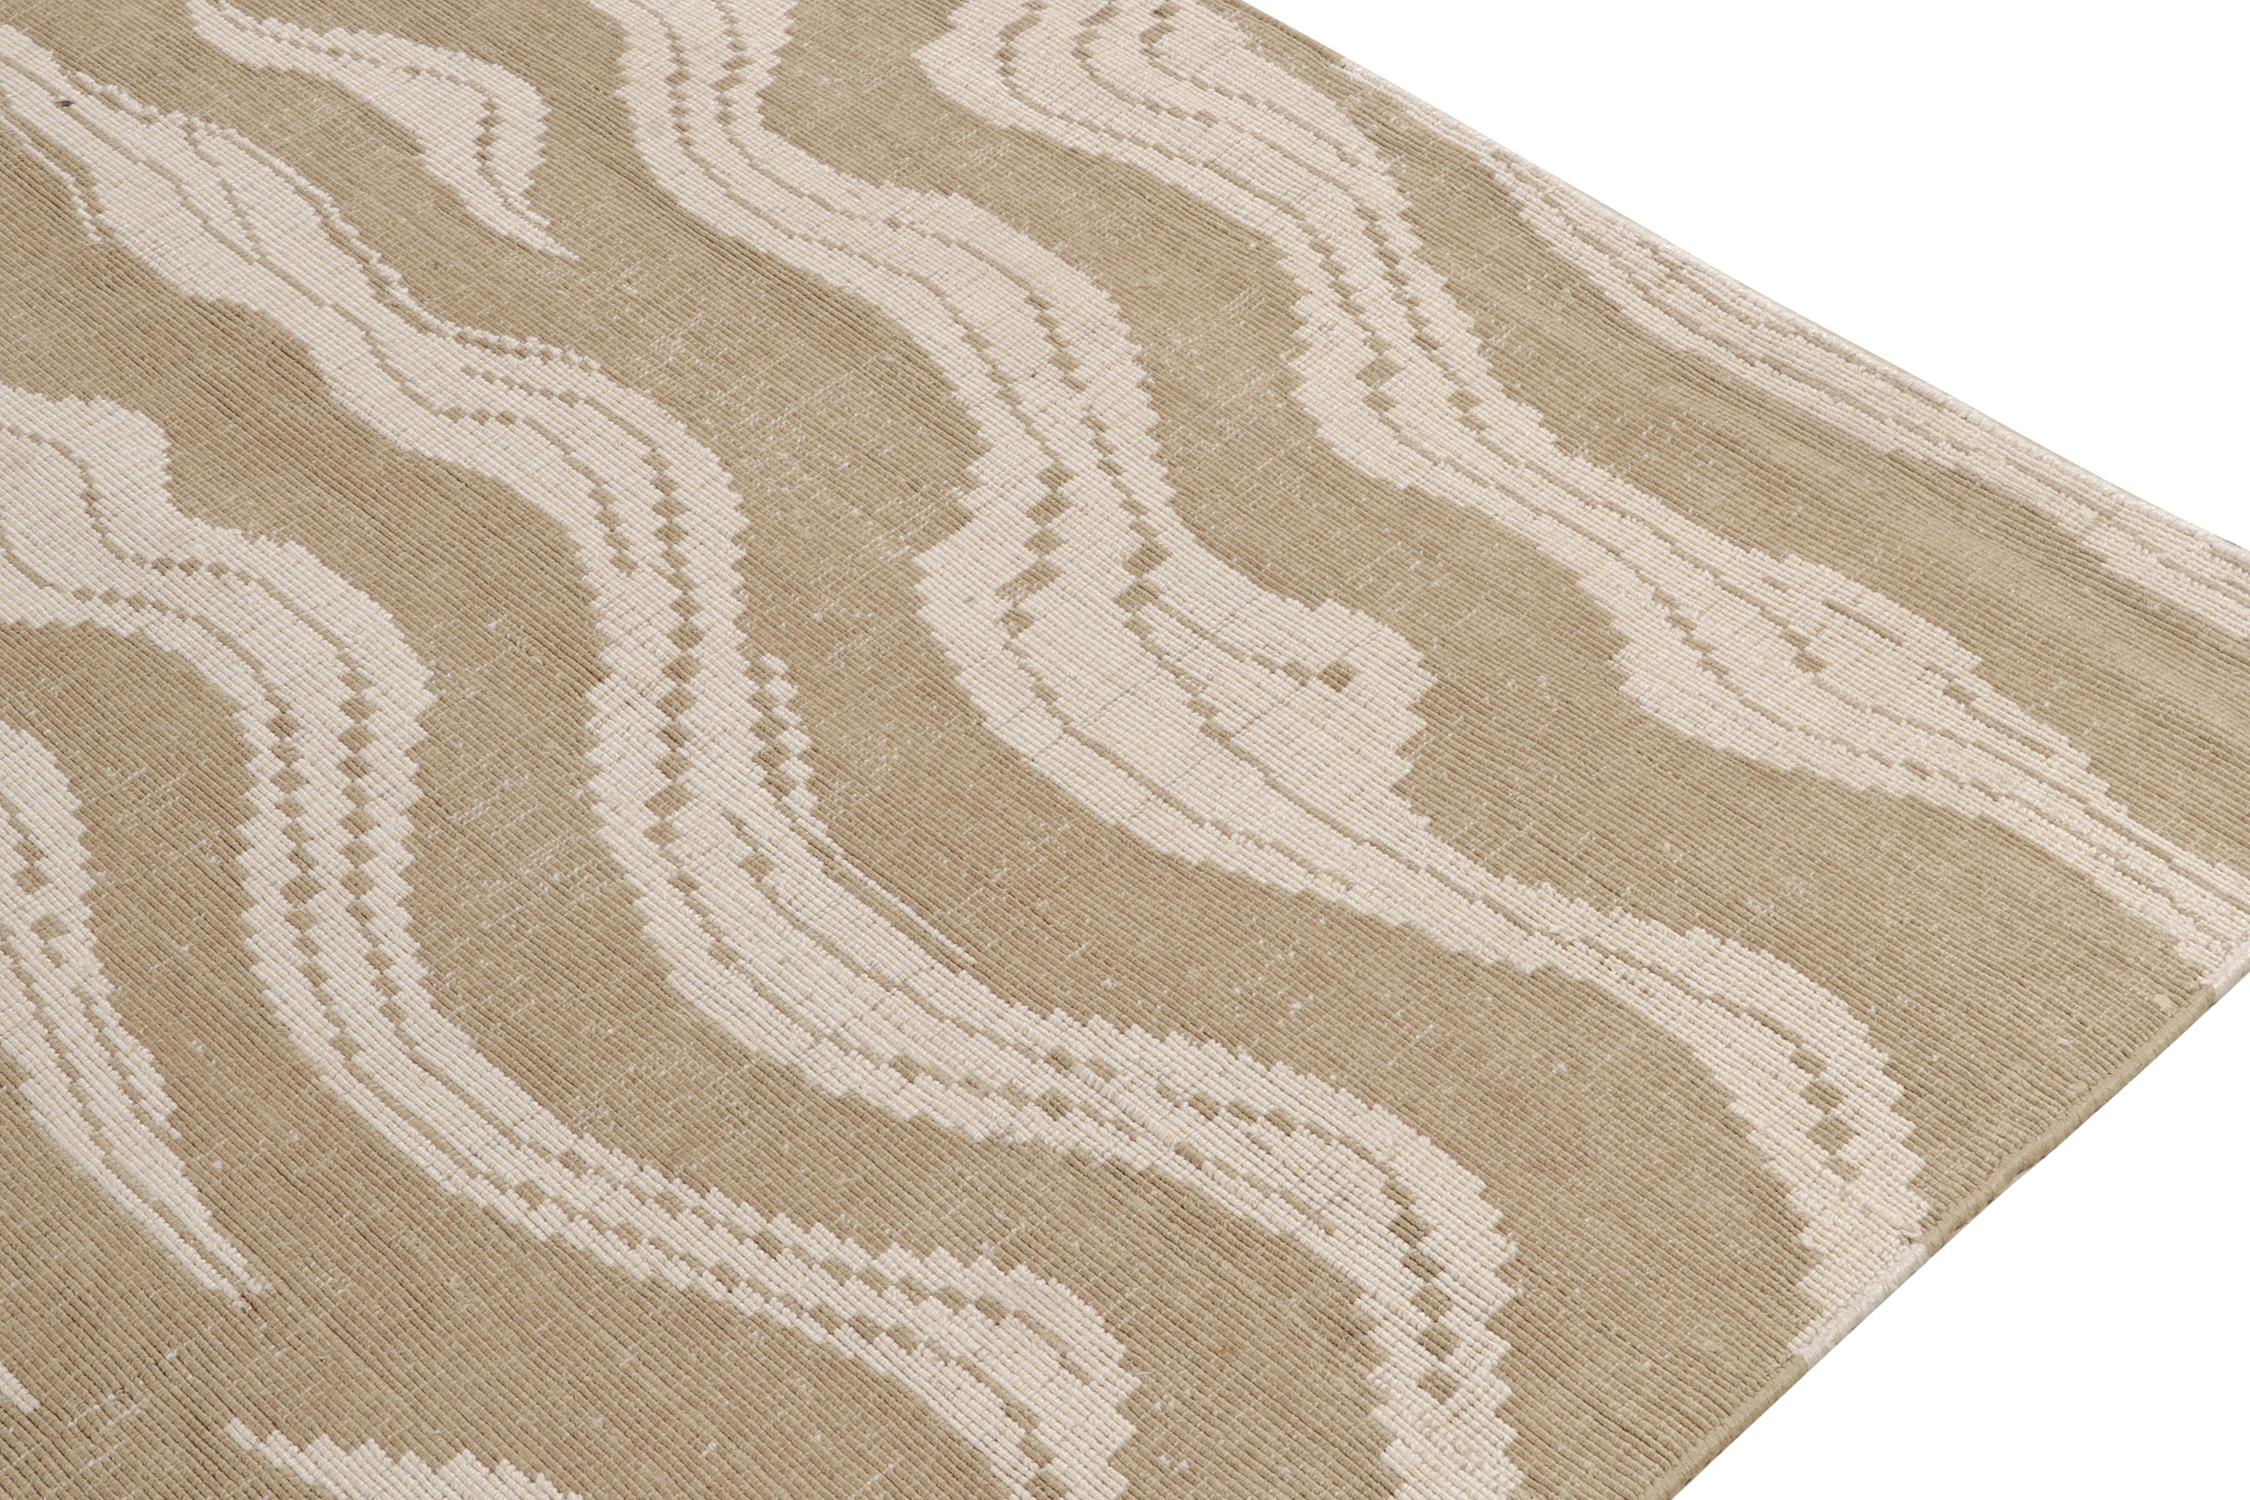 Rug & Kilim's Hand-Knotted Abstract Rug in Beige-Brown Wavy Stripes In New Condition For Sale In Long Island City, NY